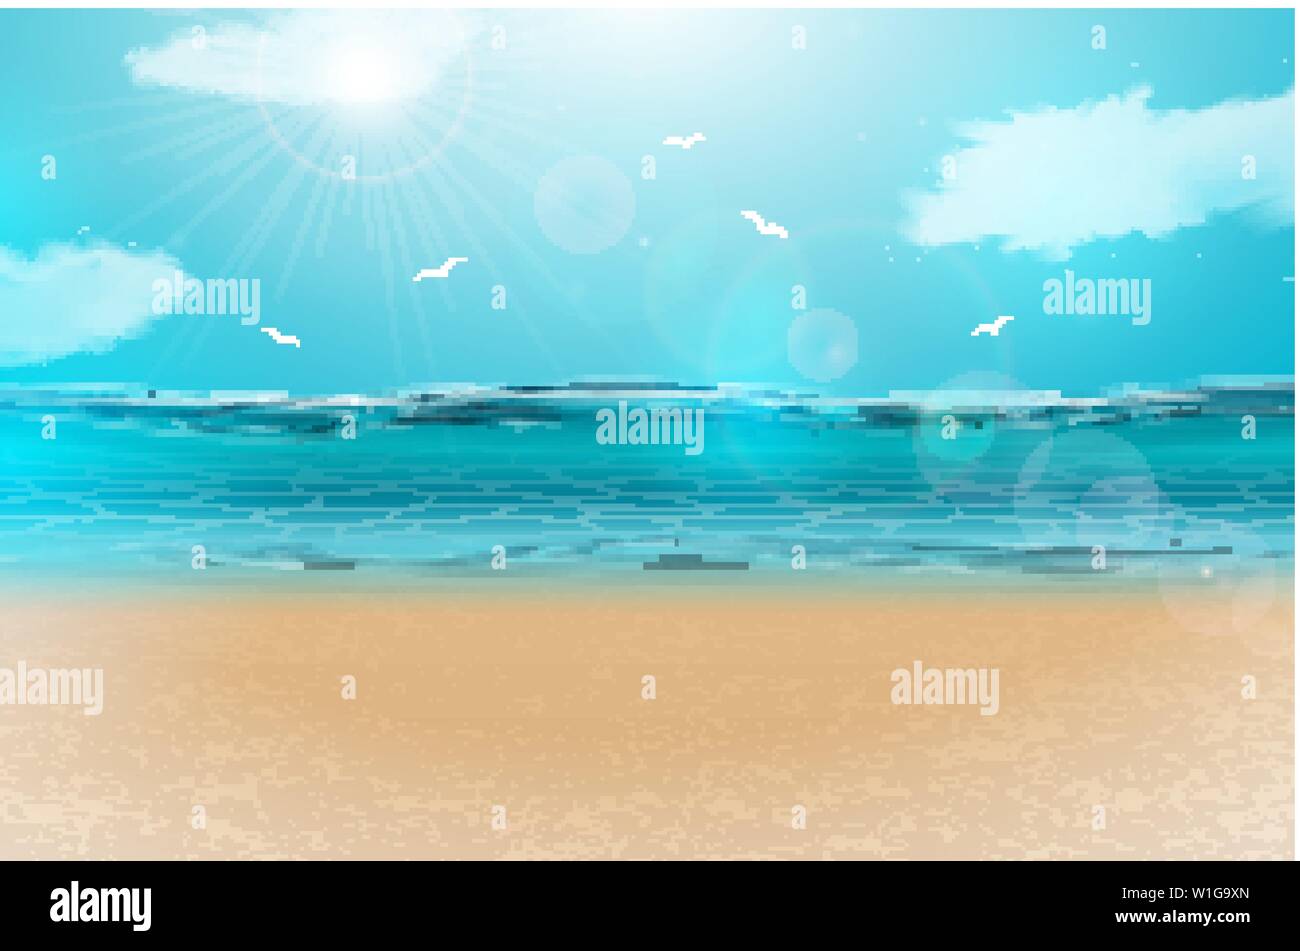 Vector blue ocean landscape background design with cloudy sky. Summer illustration with sea scene and sandy beach for banner, flyer, invitation Stock Vector